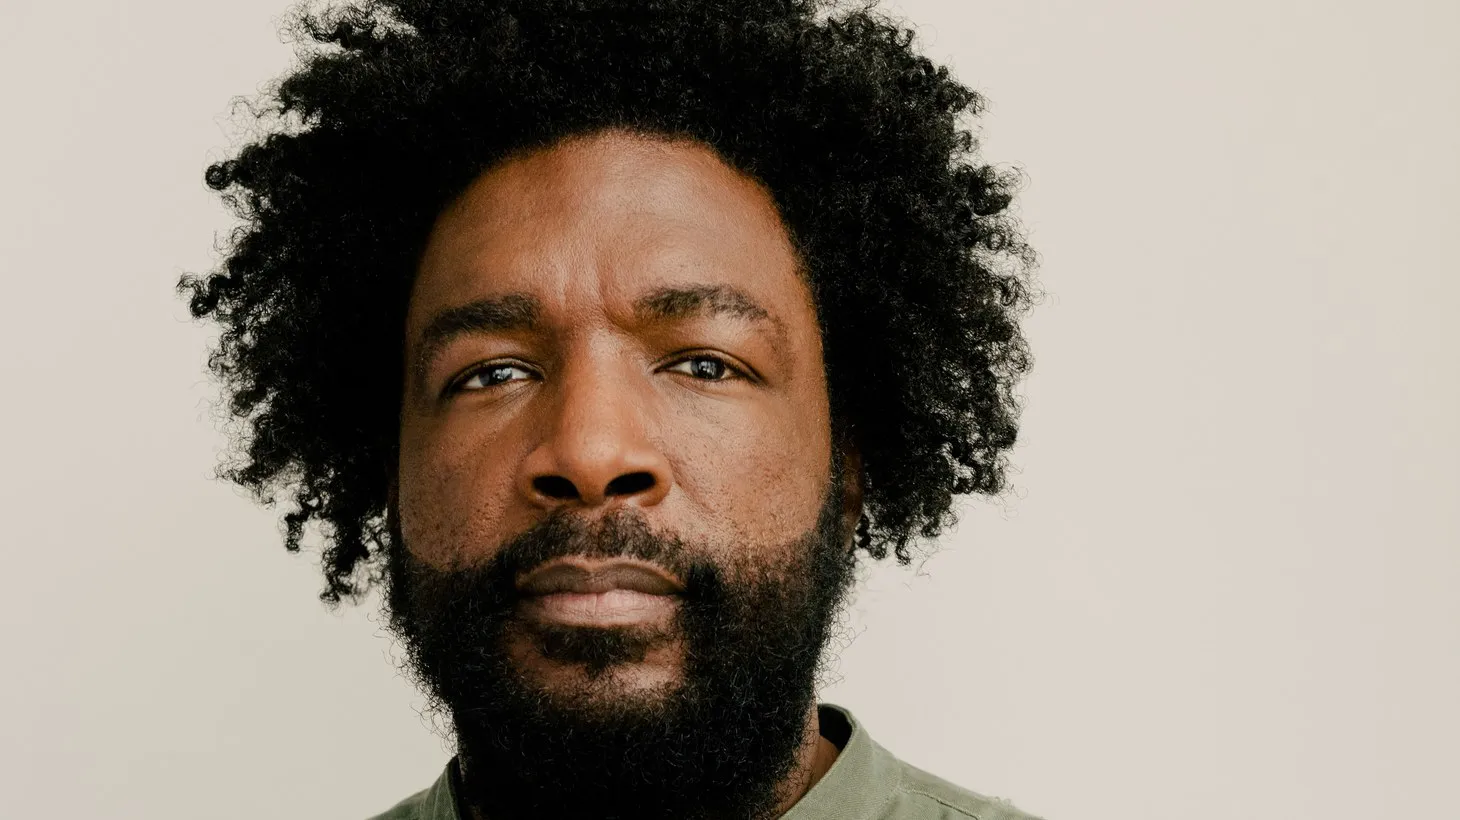 Questlove is the director of the Oscar-nominated documentary, “Summer of Soul.”